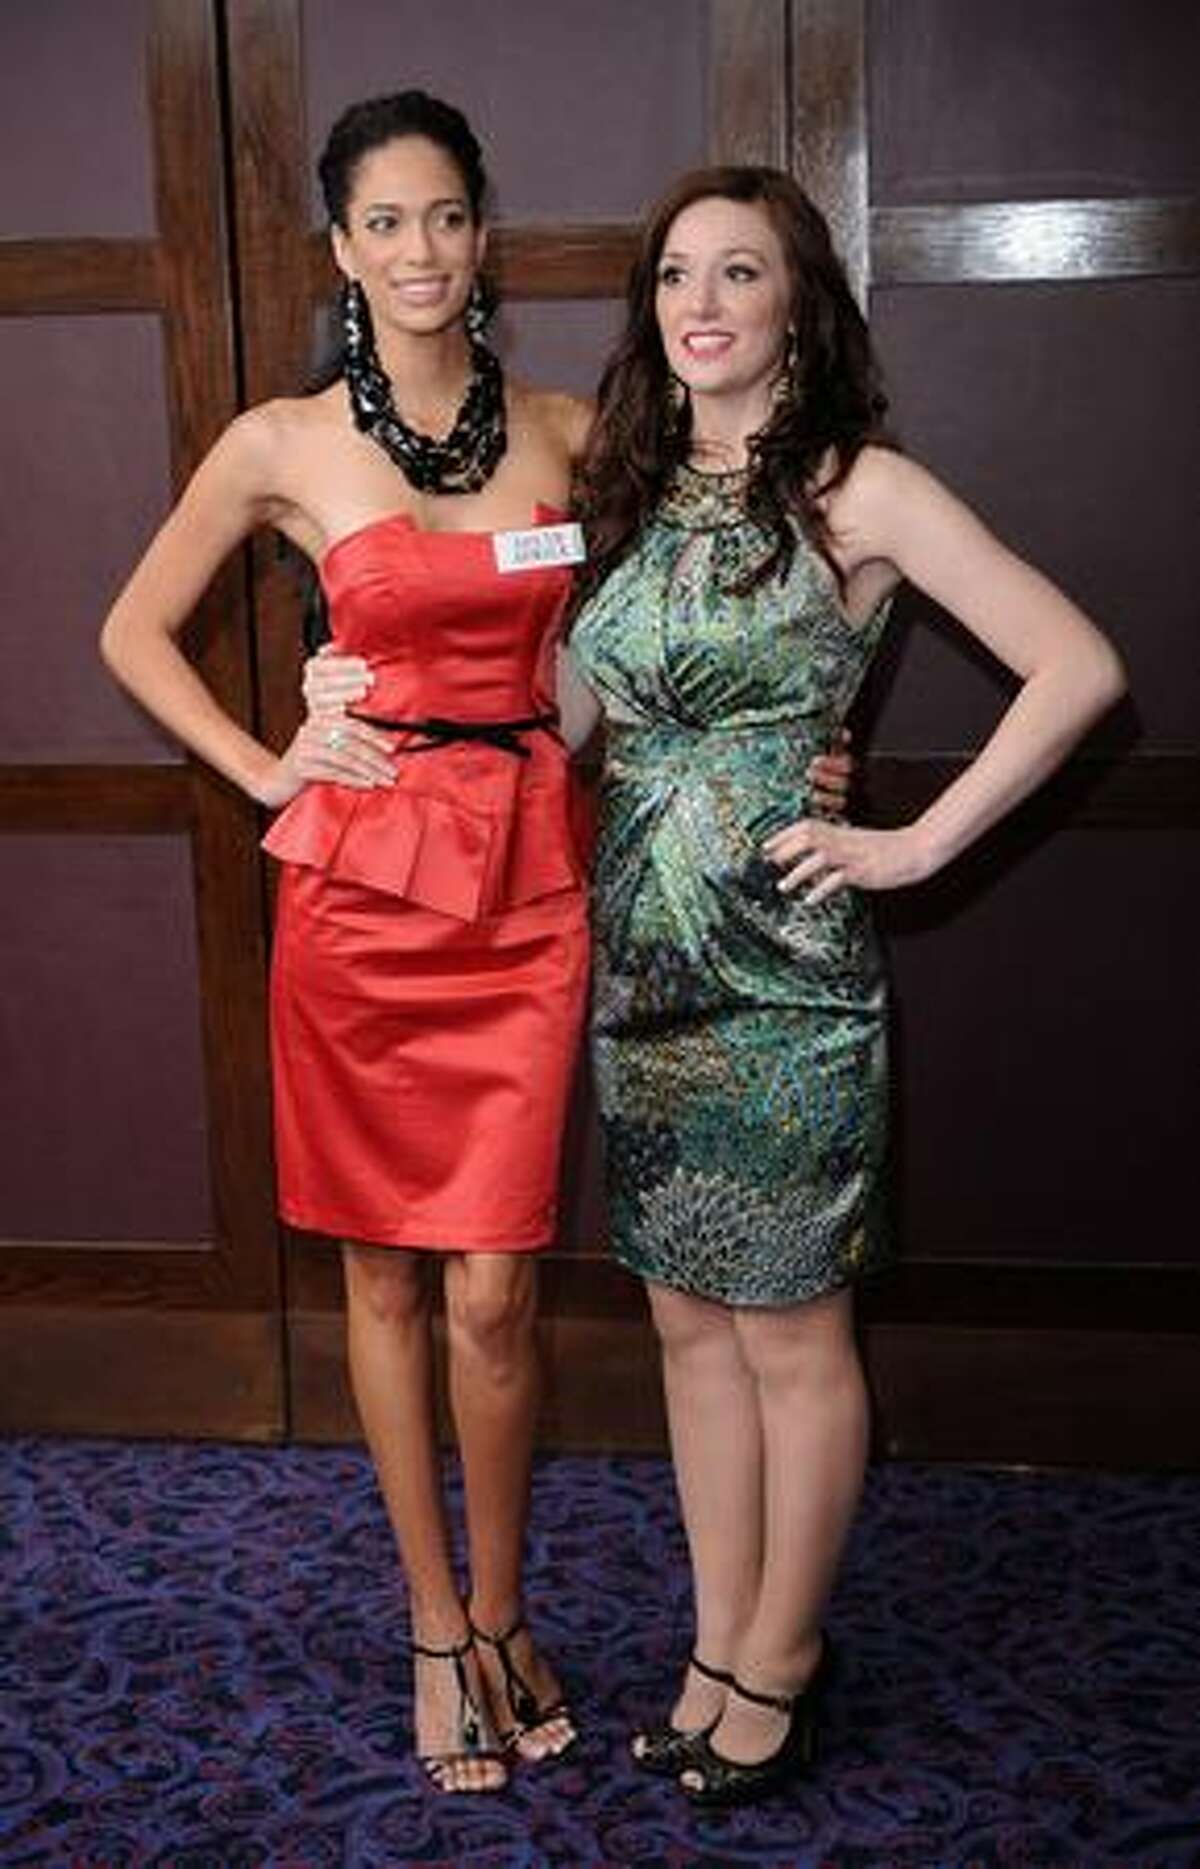 Tatum Keshwar, Miss South Africa, and Katrina Hodge, Miss England, attend the photocall.